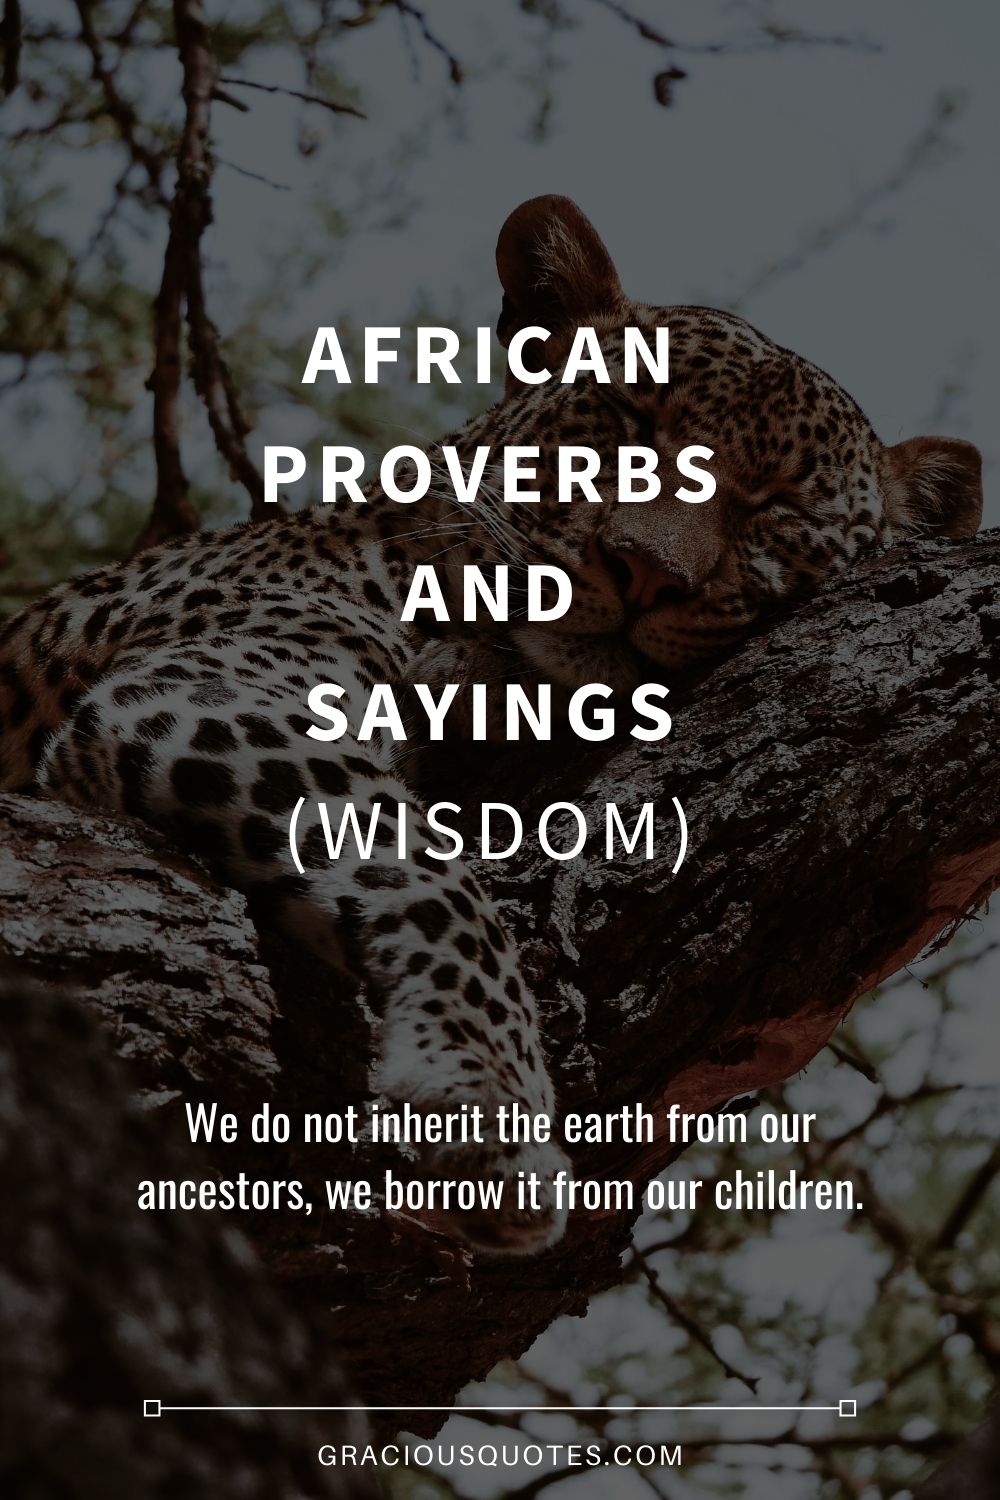 African Proverbs and Sayings (WISDOM) - Gracious Quotes